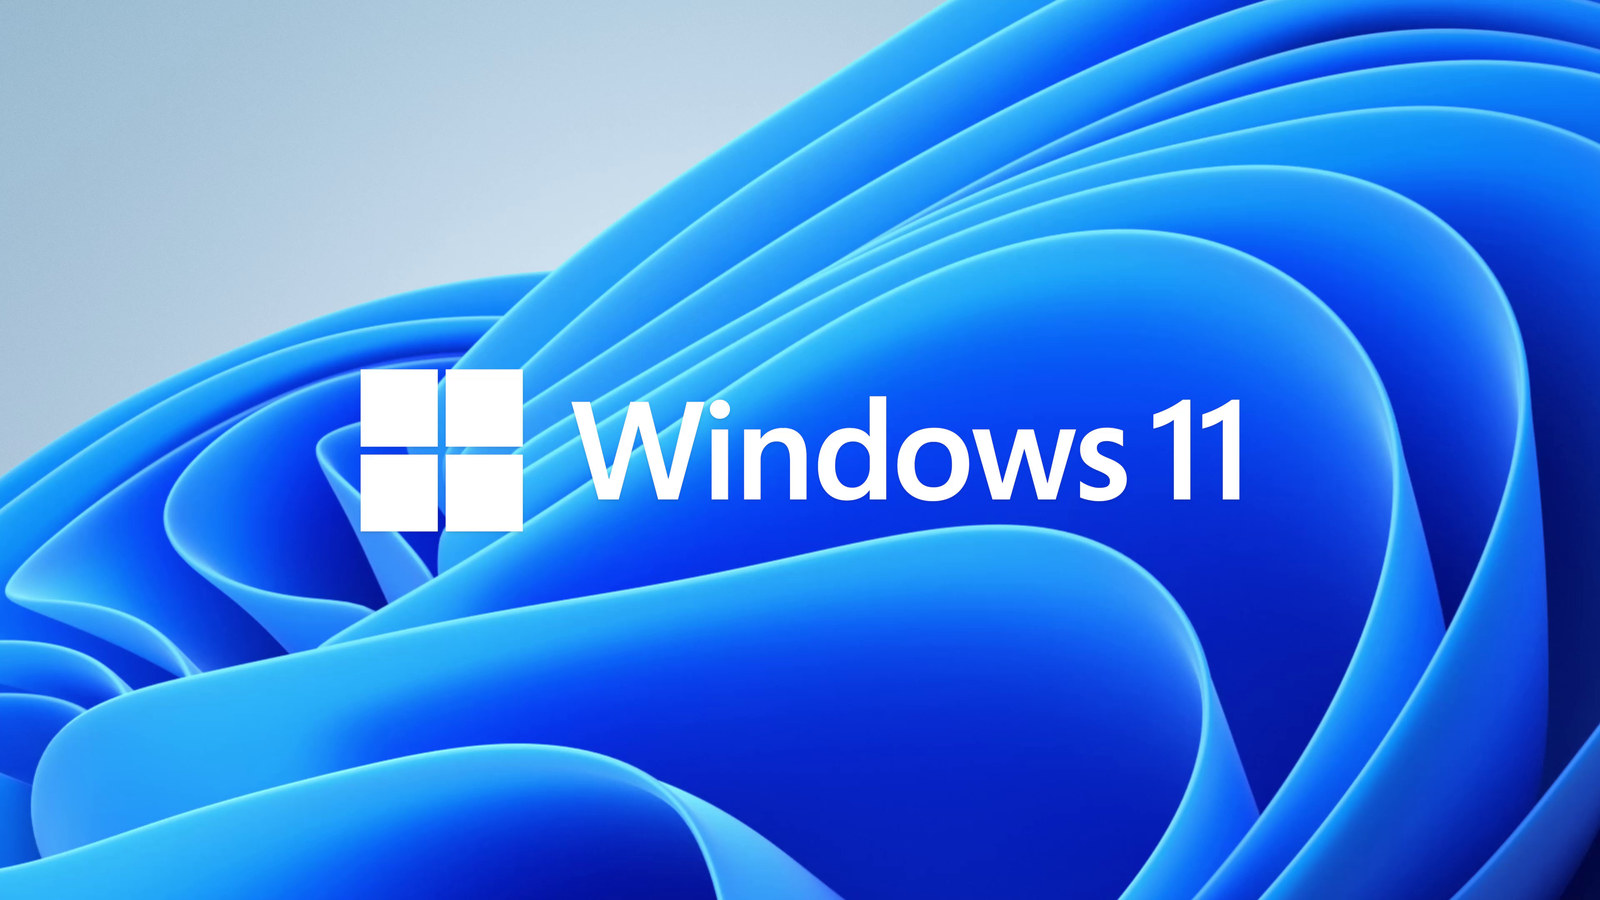 Windows 11 launches October 5th, but will you upgrade?. Rock Paper Shotgun